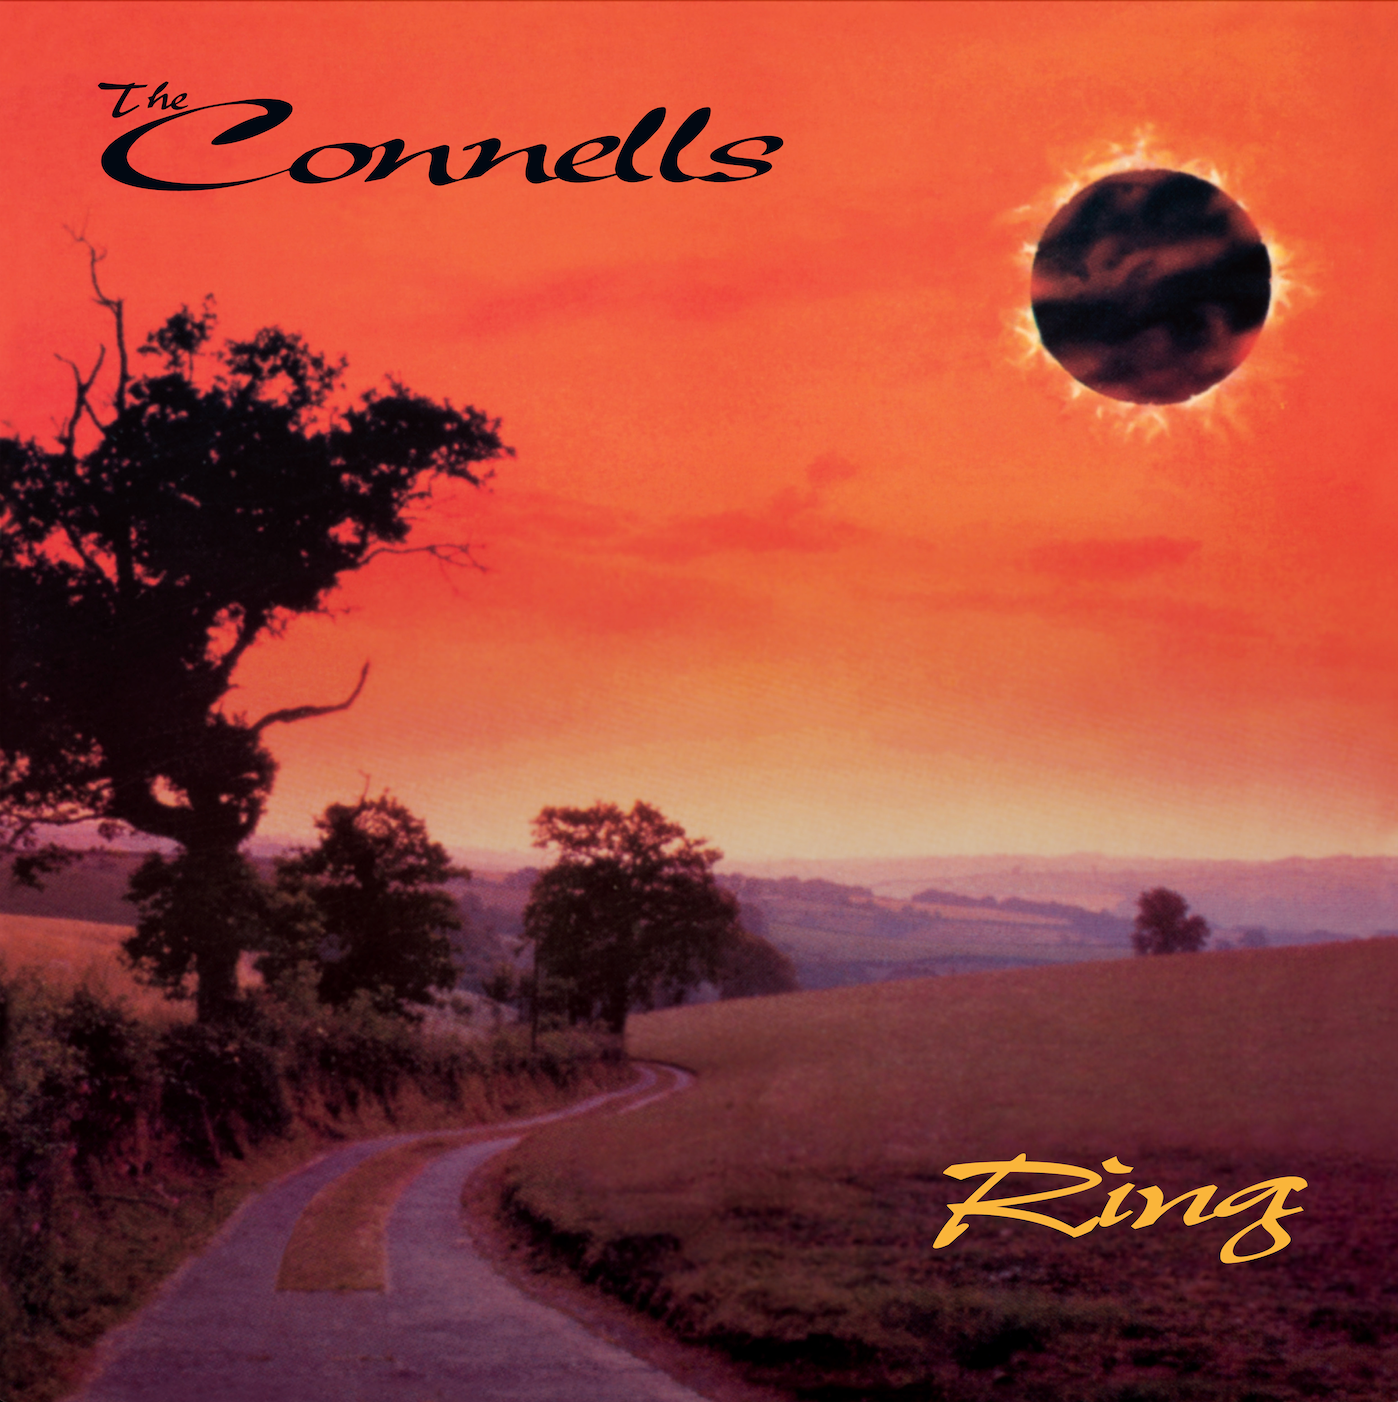 ANNOUNCING THE 30TH ANNIVERSARY RELEASE OF THE CONNELLS' BREAKTHROUGH ALBUM RING